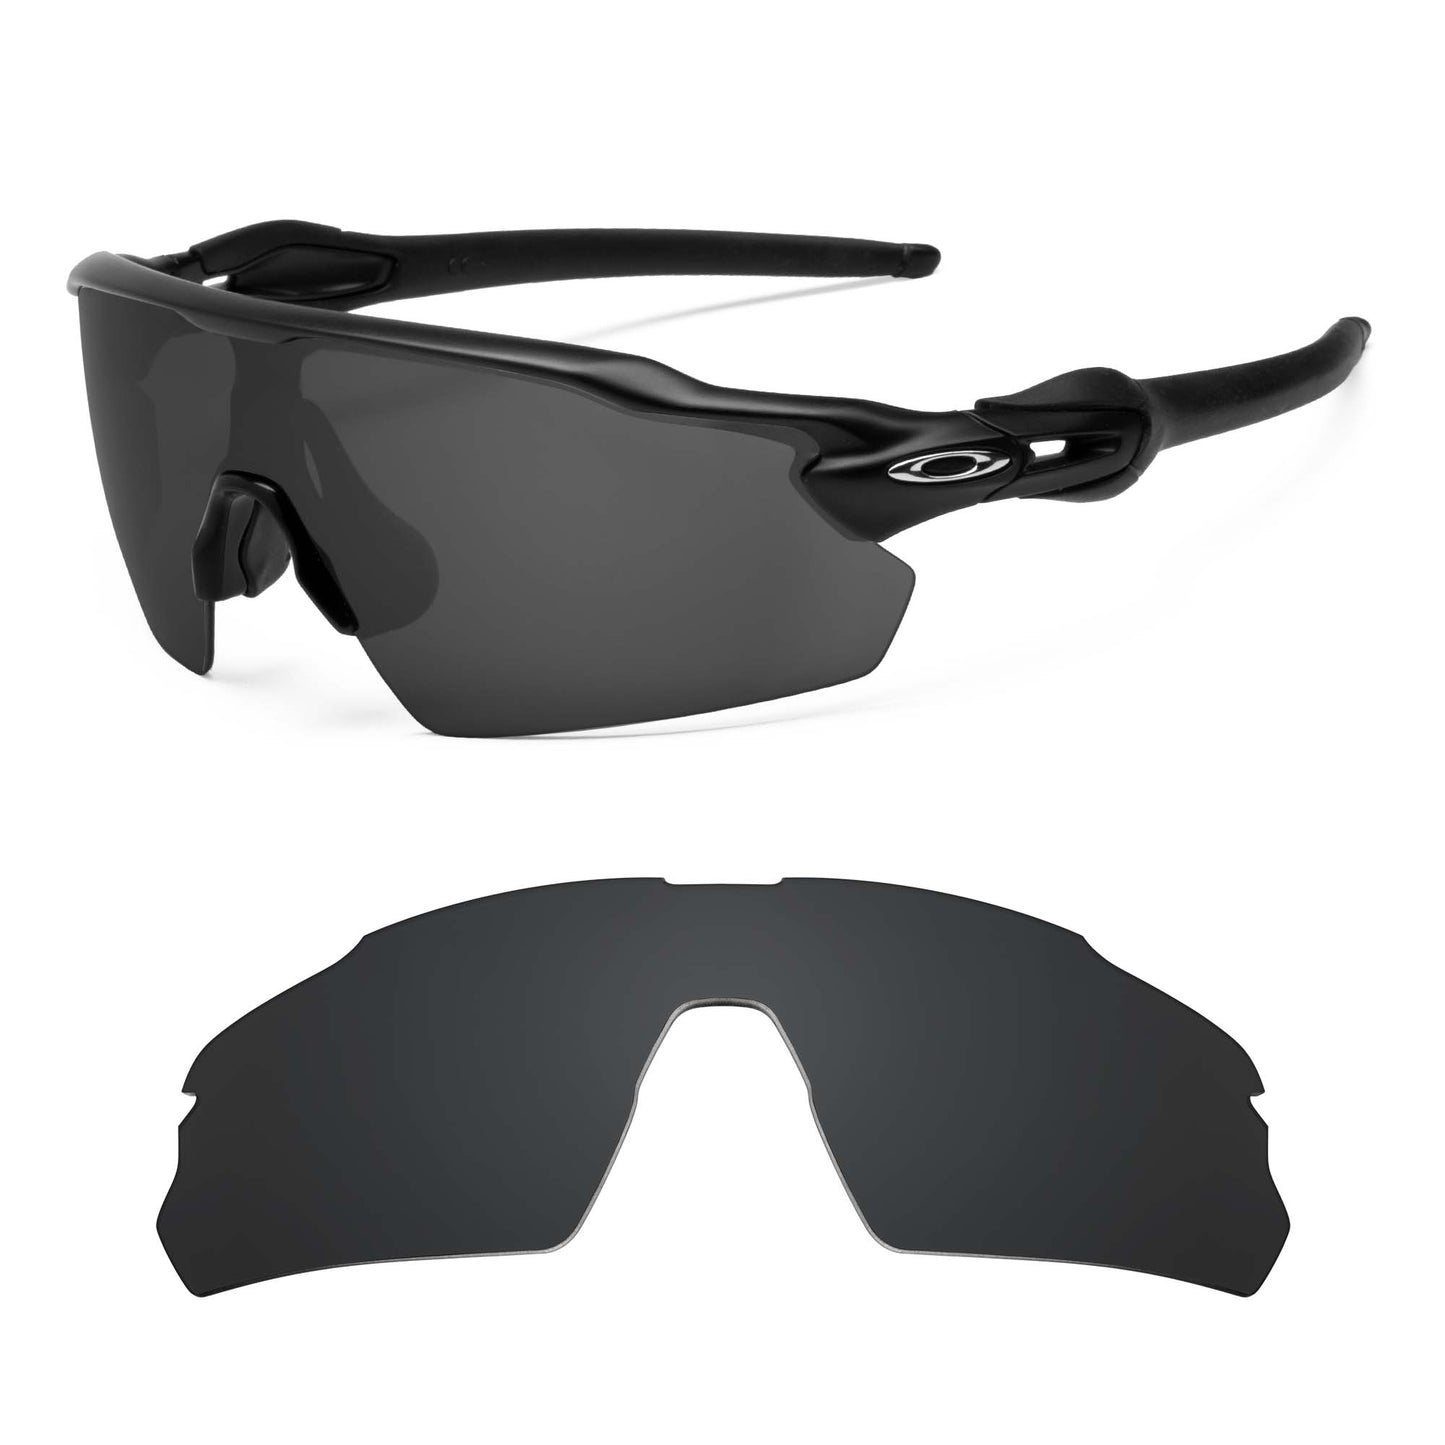 Oakley Radar EV Pitch sunglasses with replacement lenses